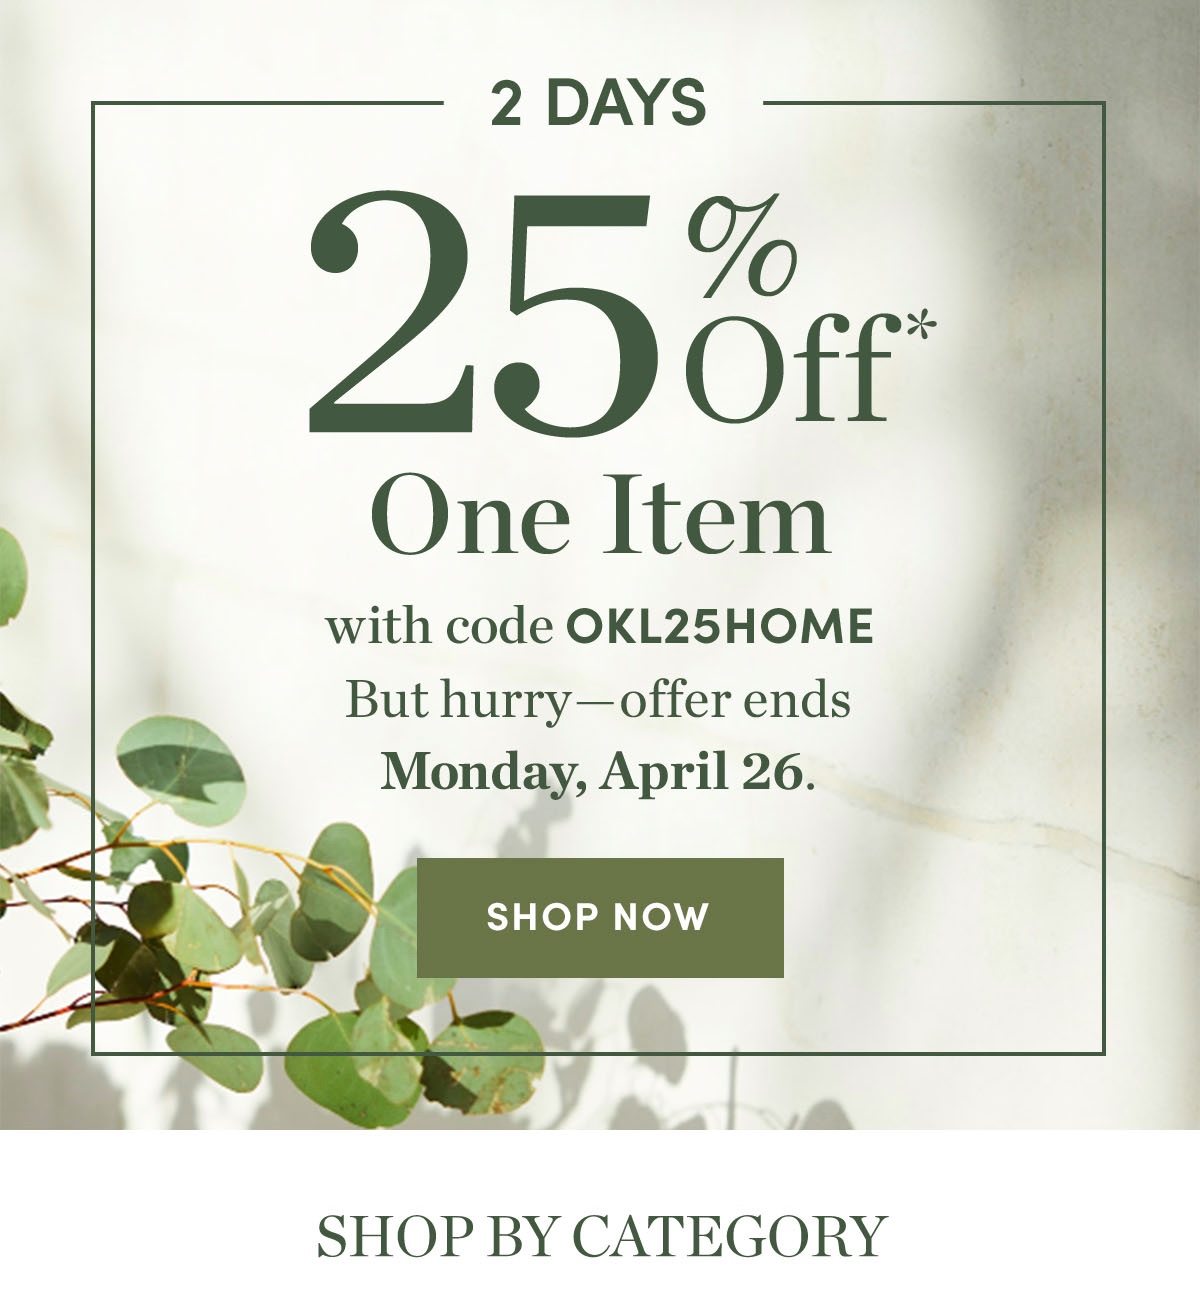 2 days - 25 percent off one item with code okl25home. offer ends monday, april 26